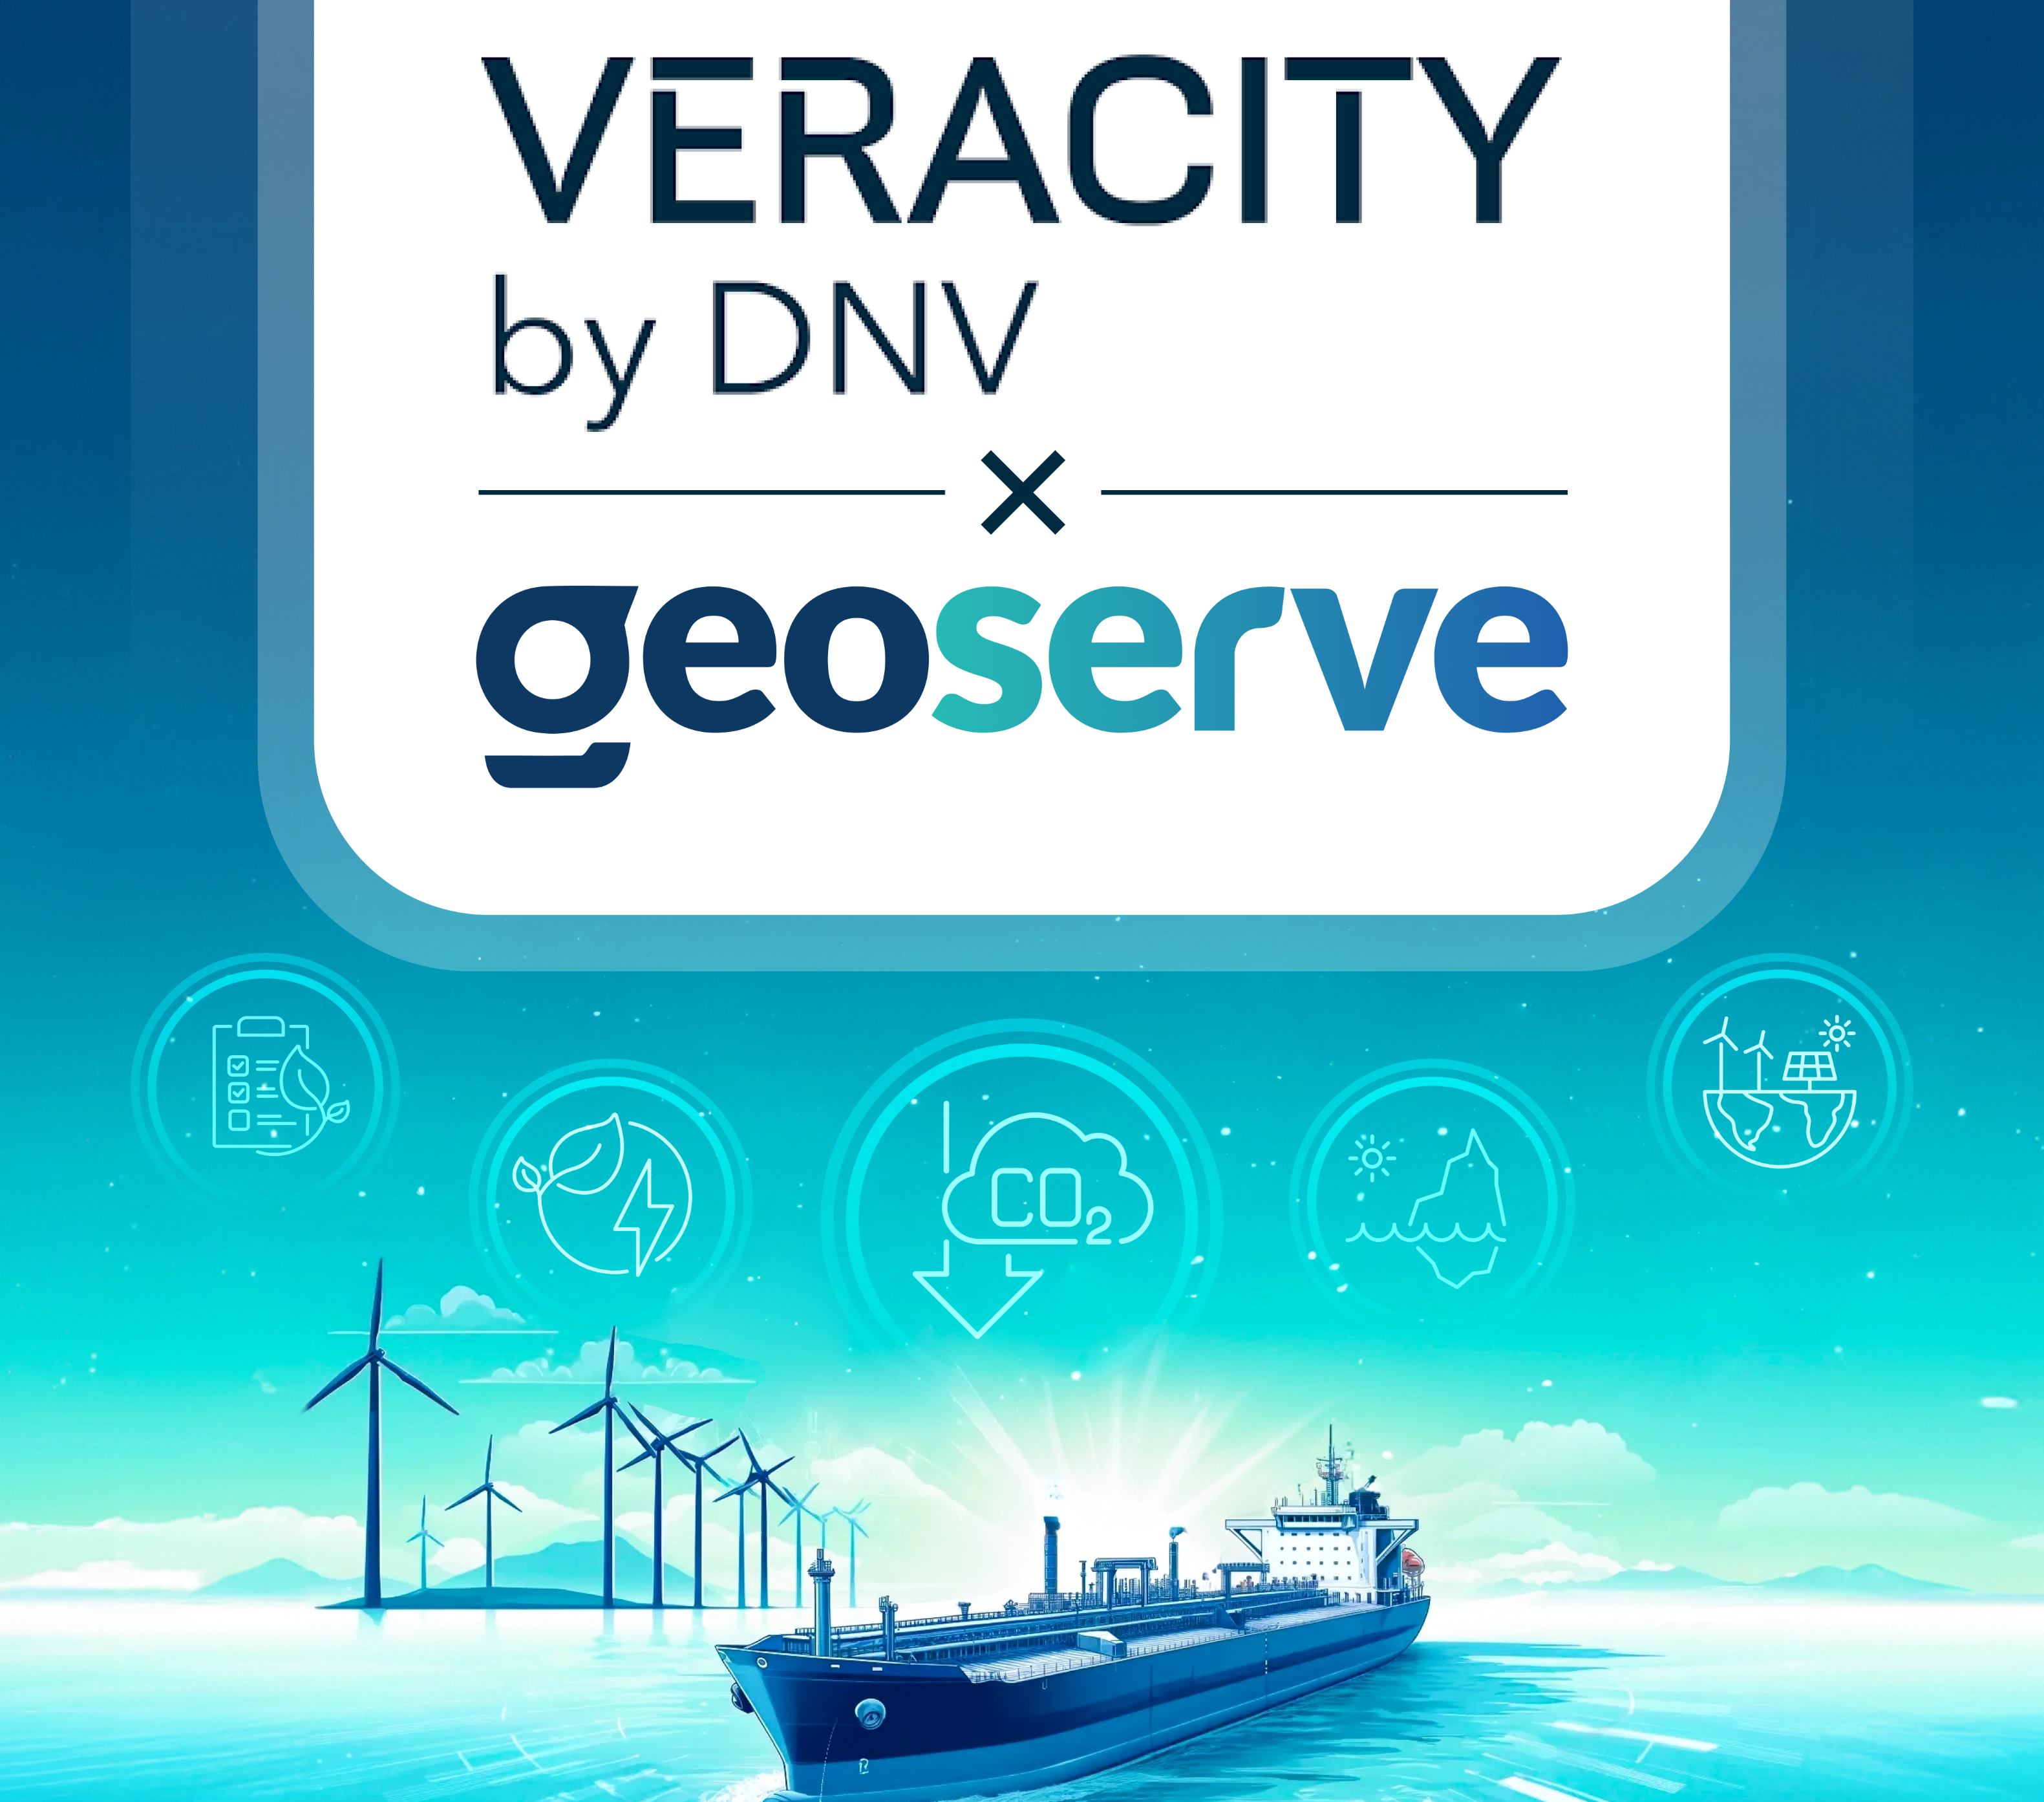 Veracity by DNV and GeoServe embark on a collaborative journey to manage commercial and regulatory compliance for emissions.